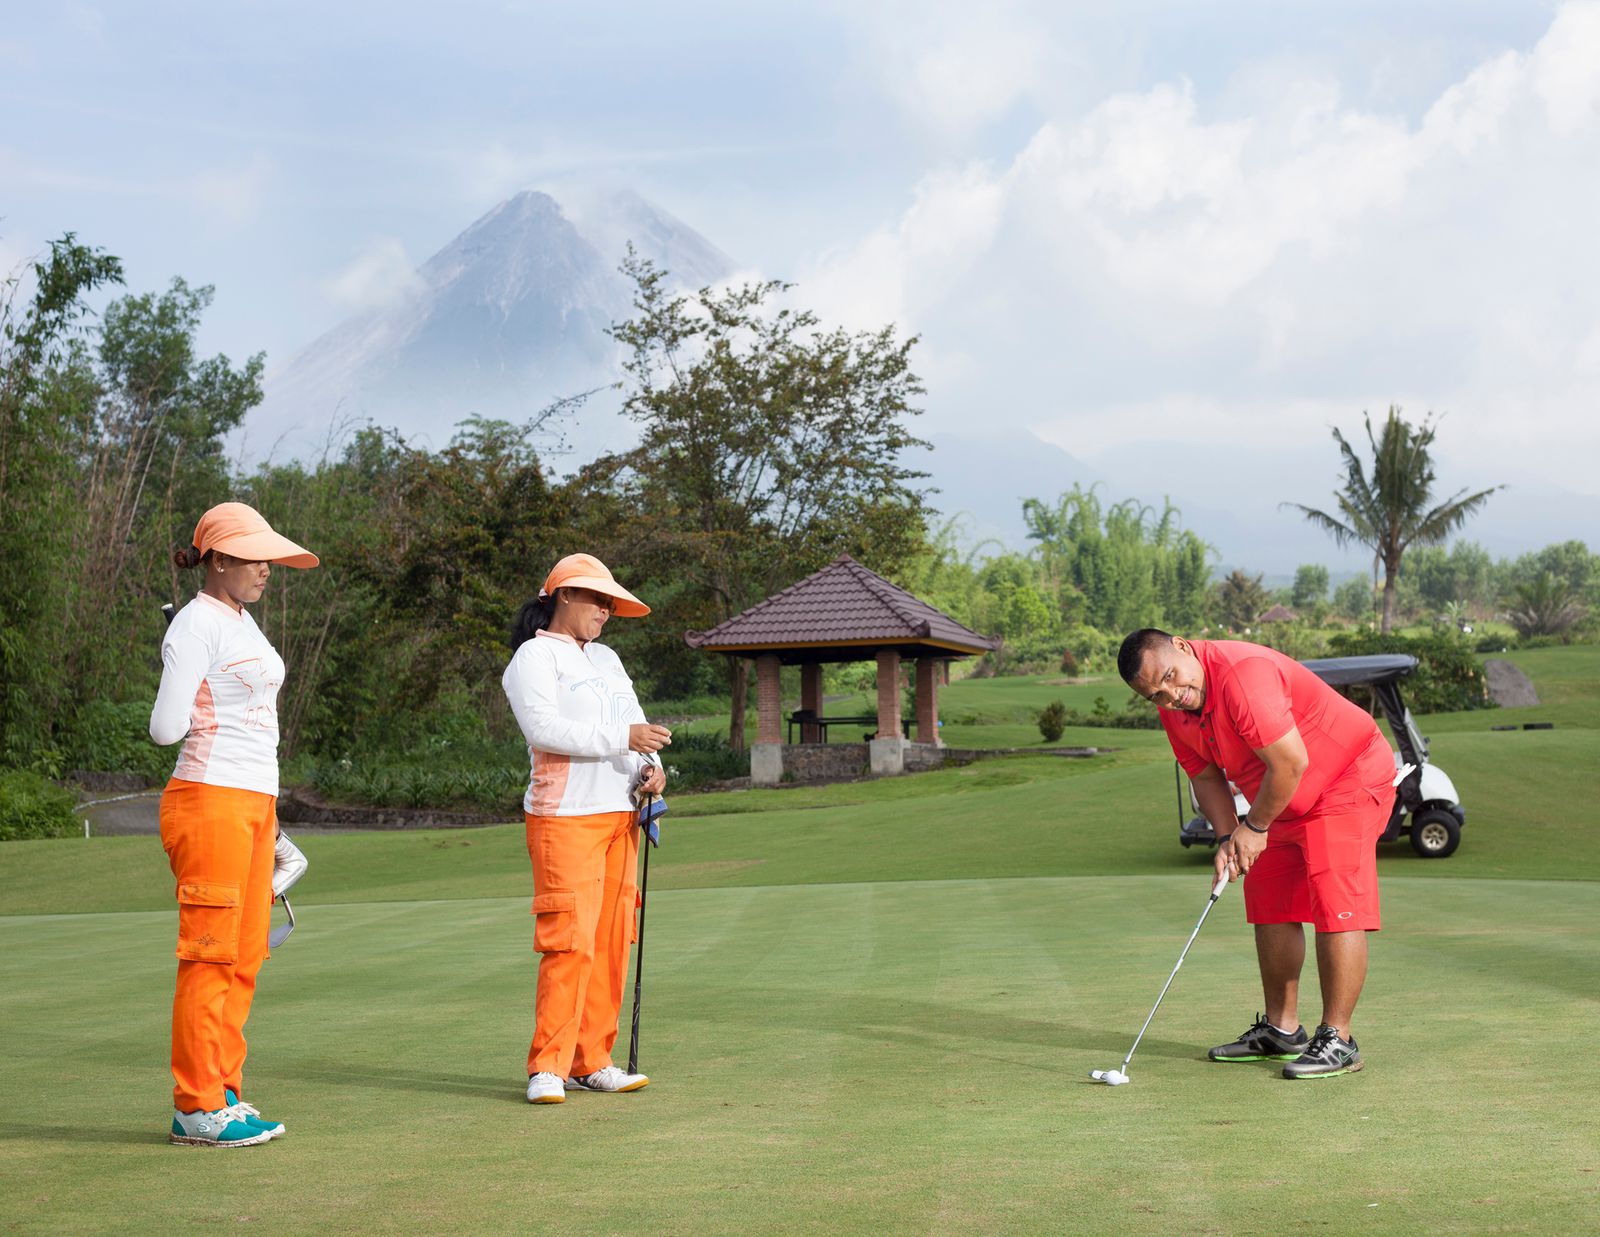 © Hahn Hartung - Golf course on Mount Merapi in Central Java.